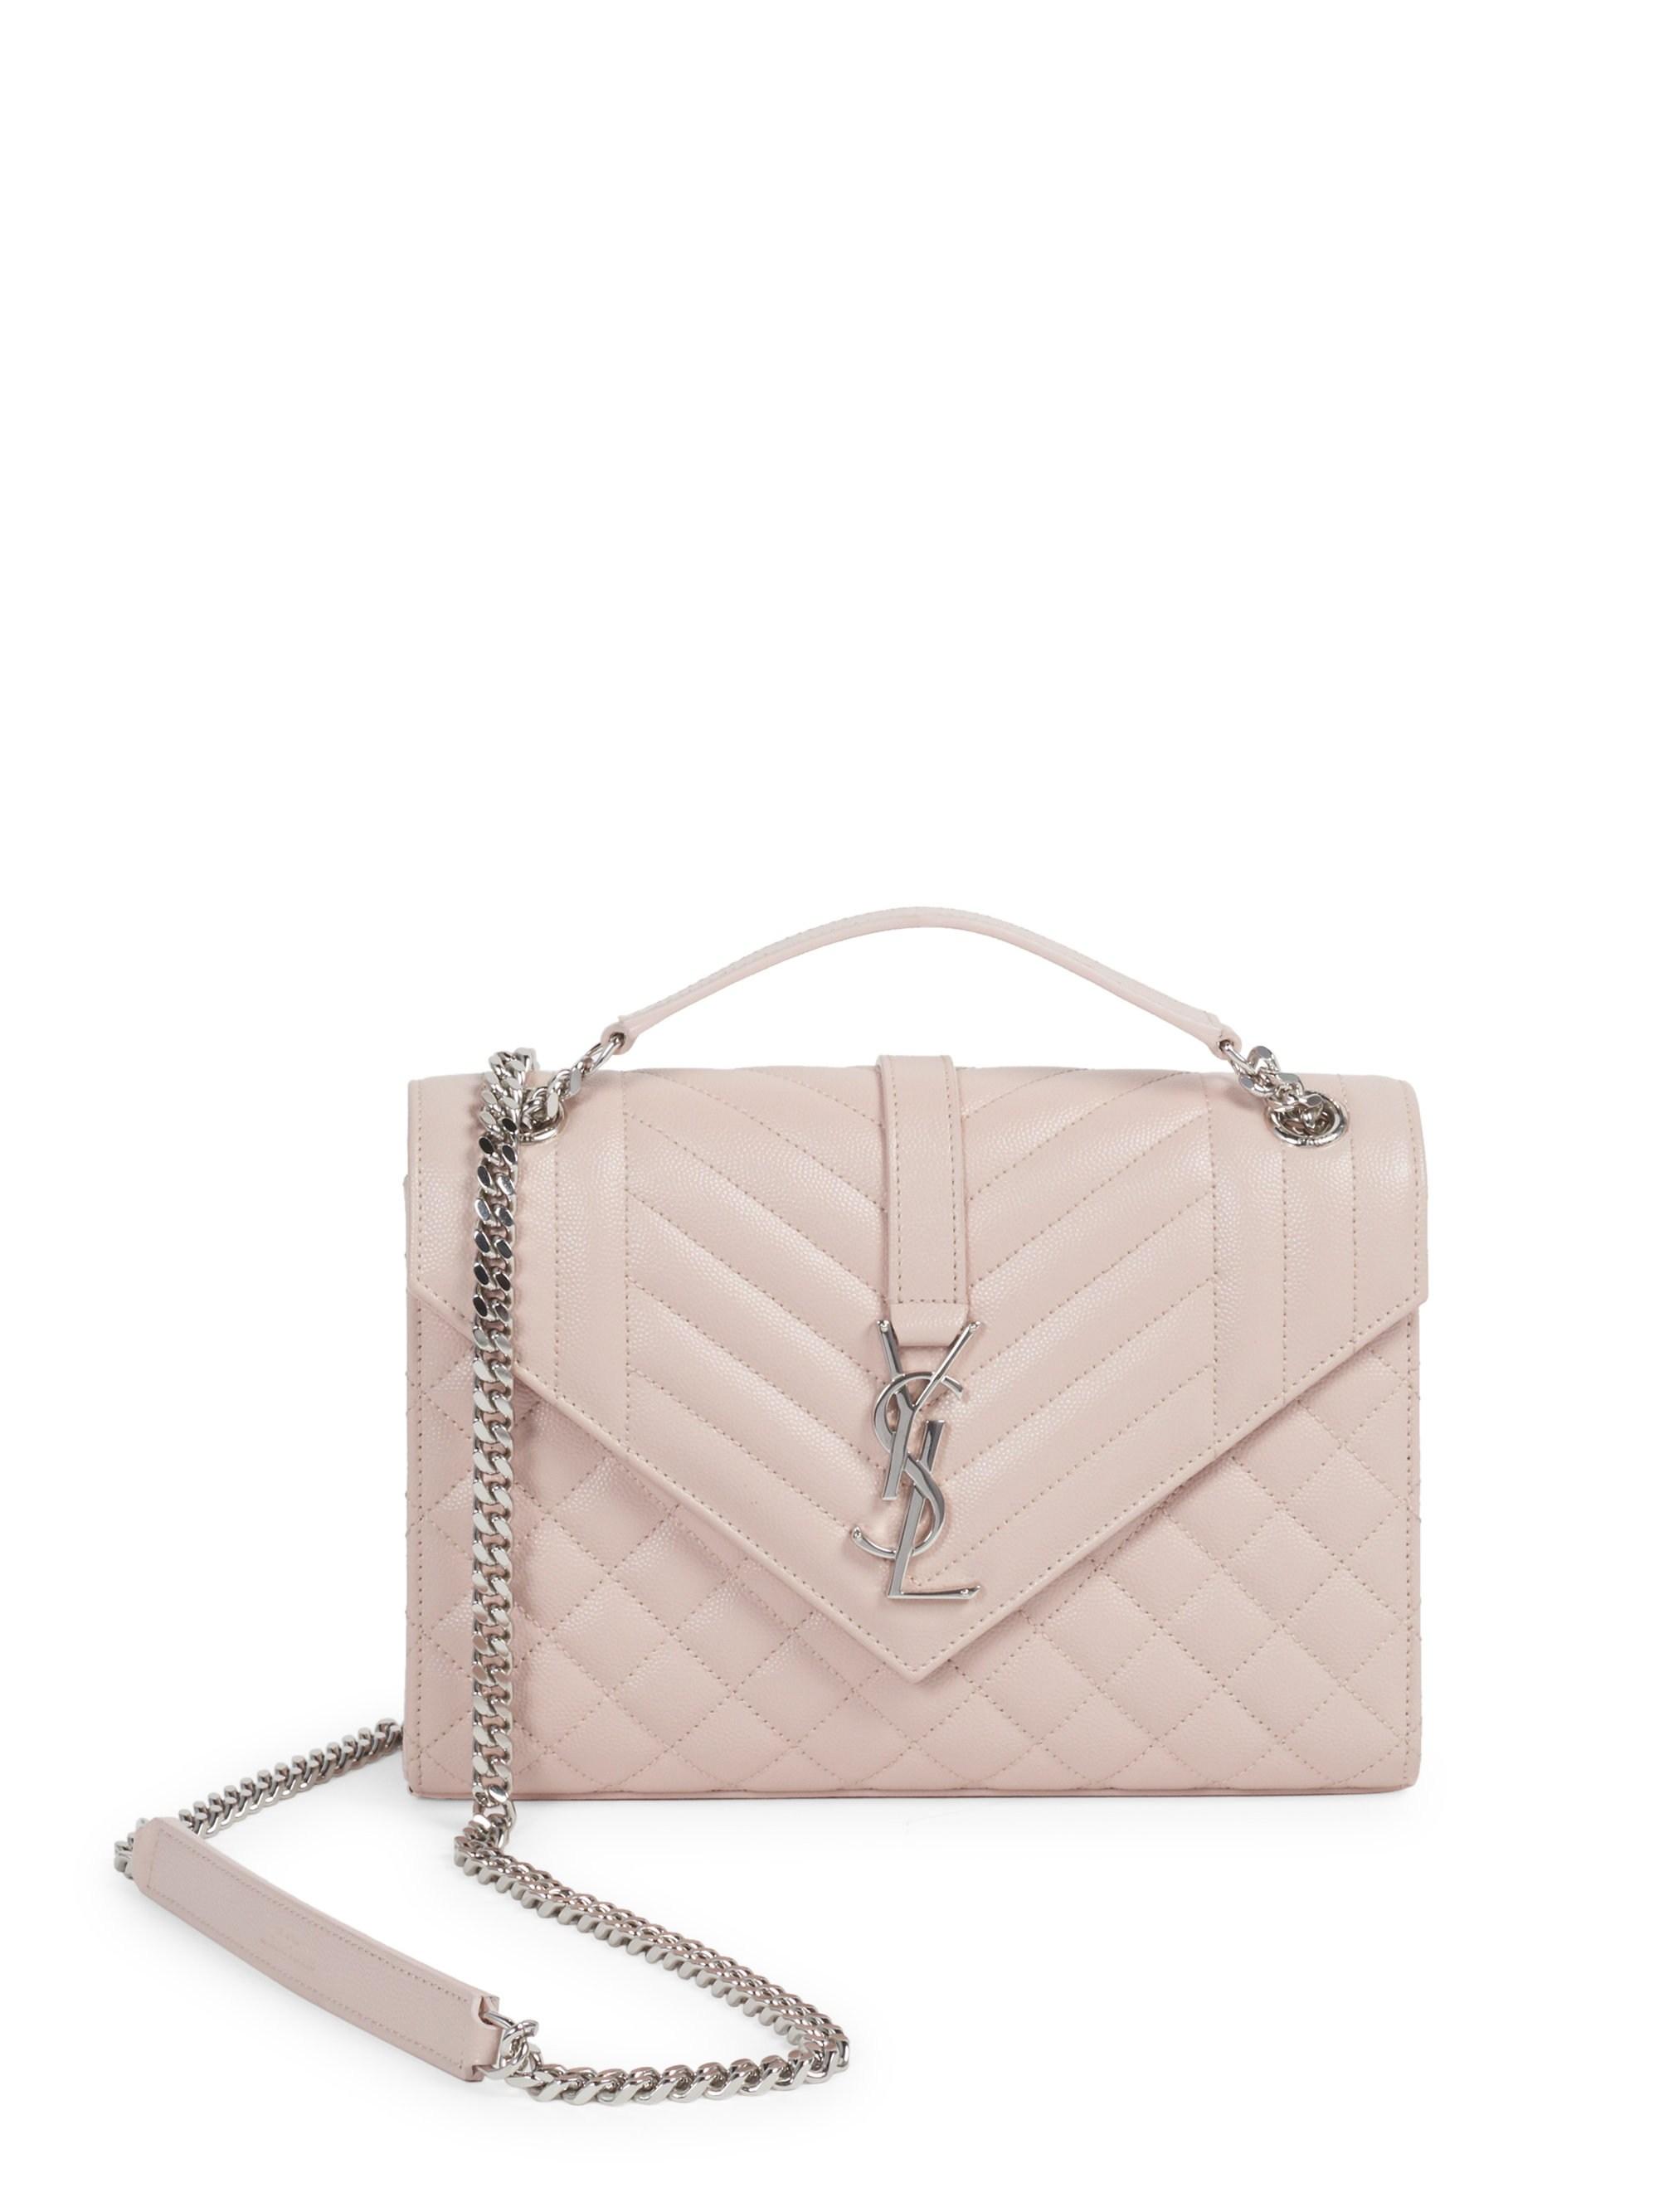 Saint Laurent Envelope Large Quilted Leather Crossbody